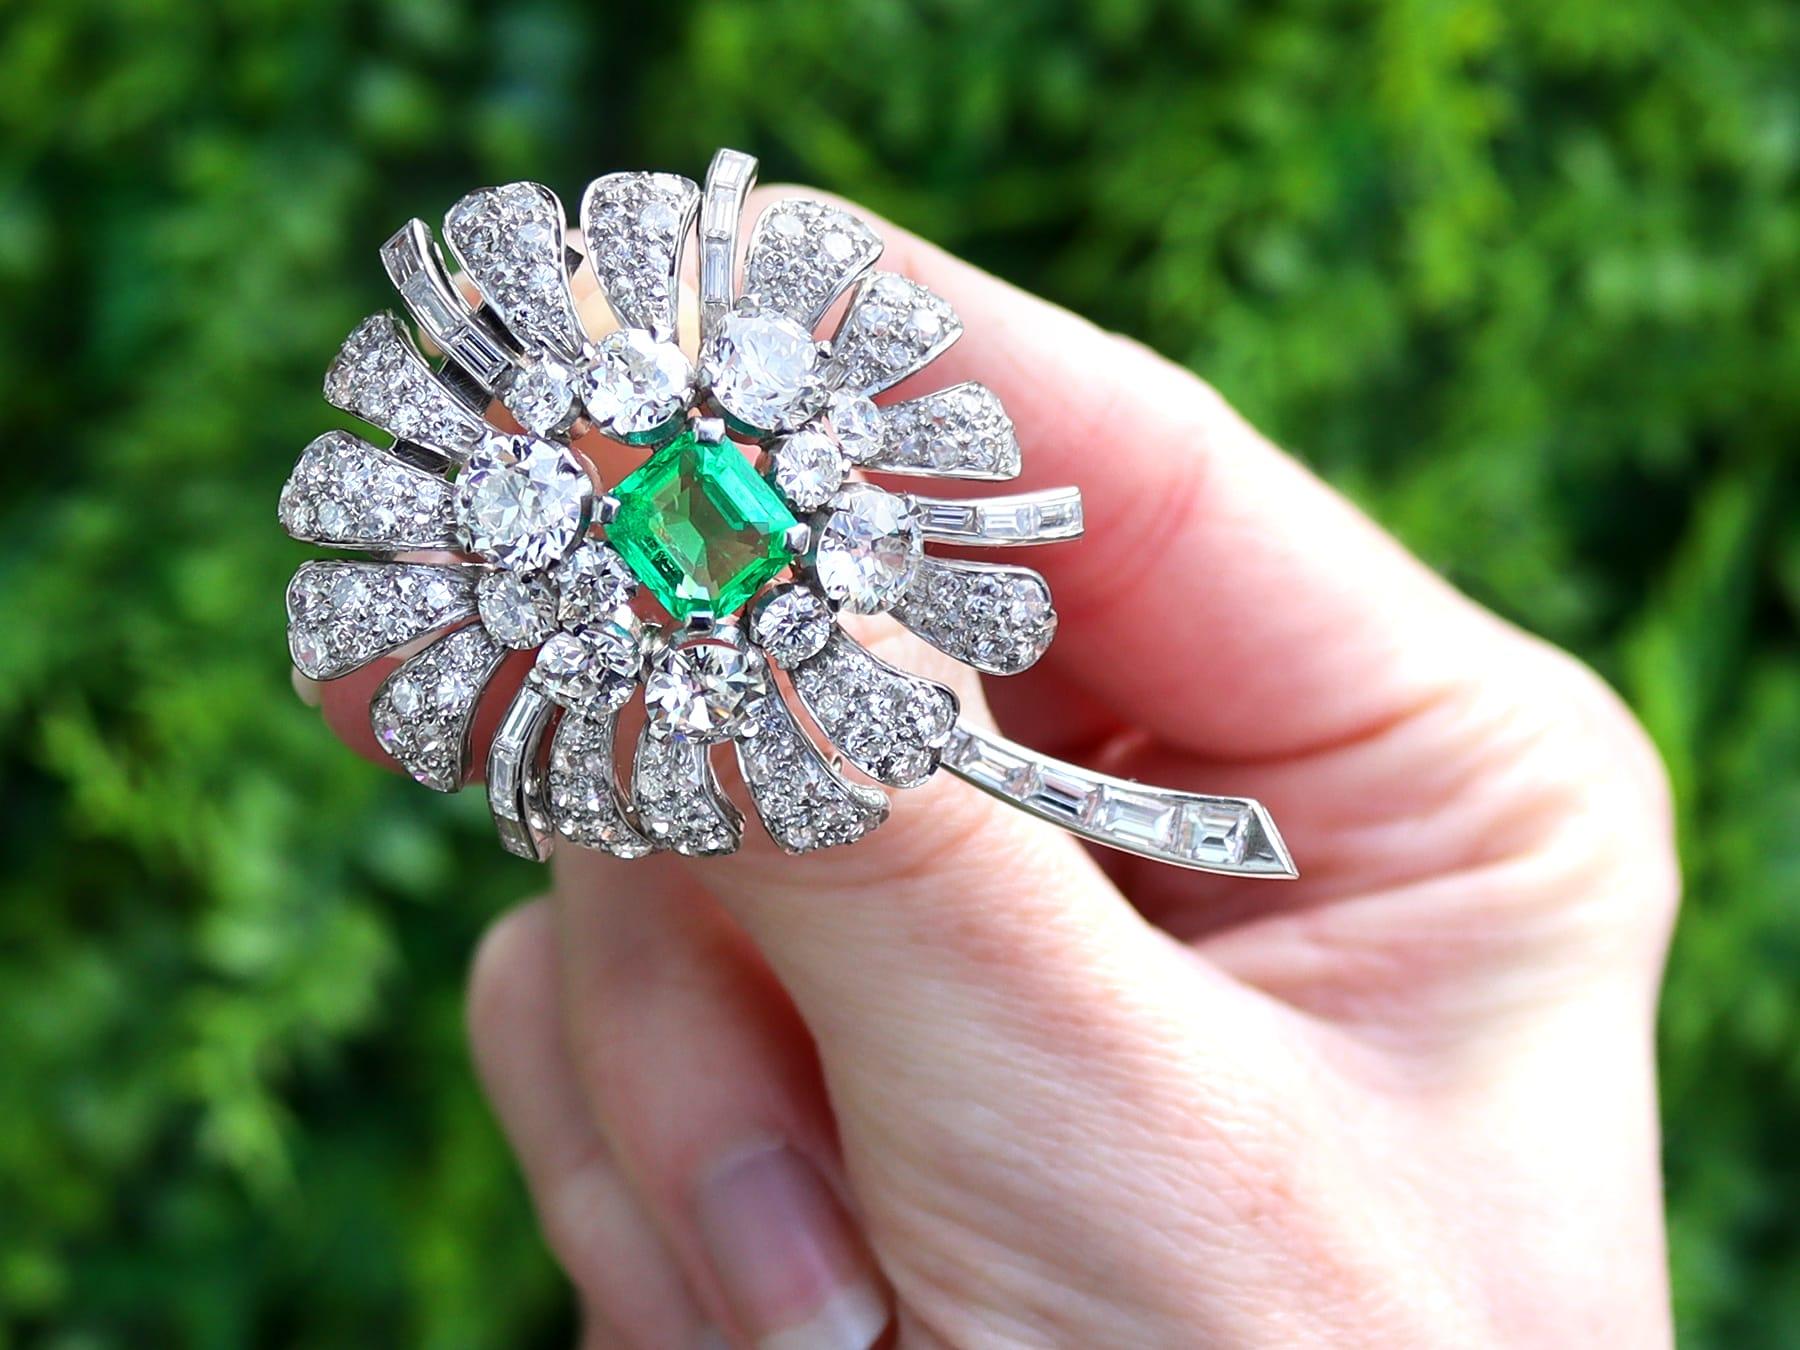 A magnificent, stunning and impressive antique 2.10 carat emerald and 7.73 carat diamond, platinum floral brooch; part of our diverse floral jewelry and estate jewelry collections.

This magnificent, fine and impressive antique emerald and diamond